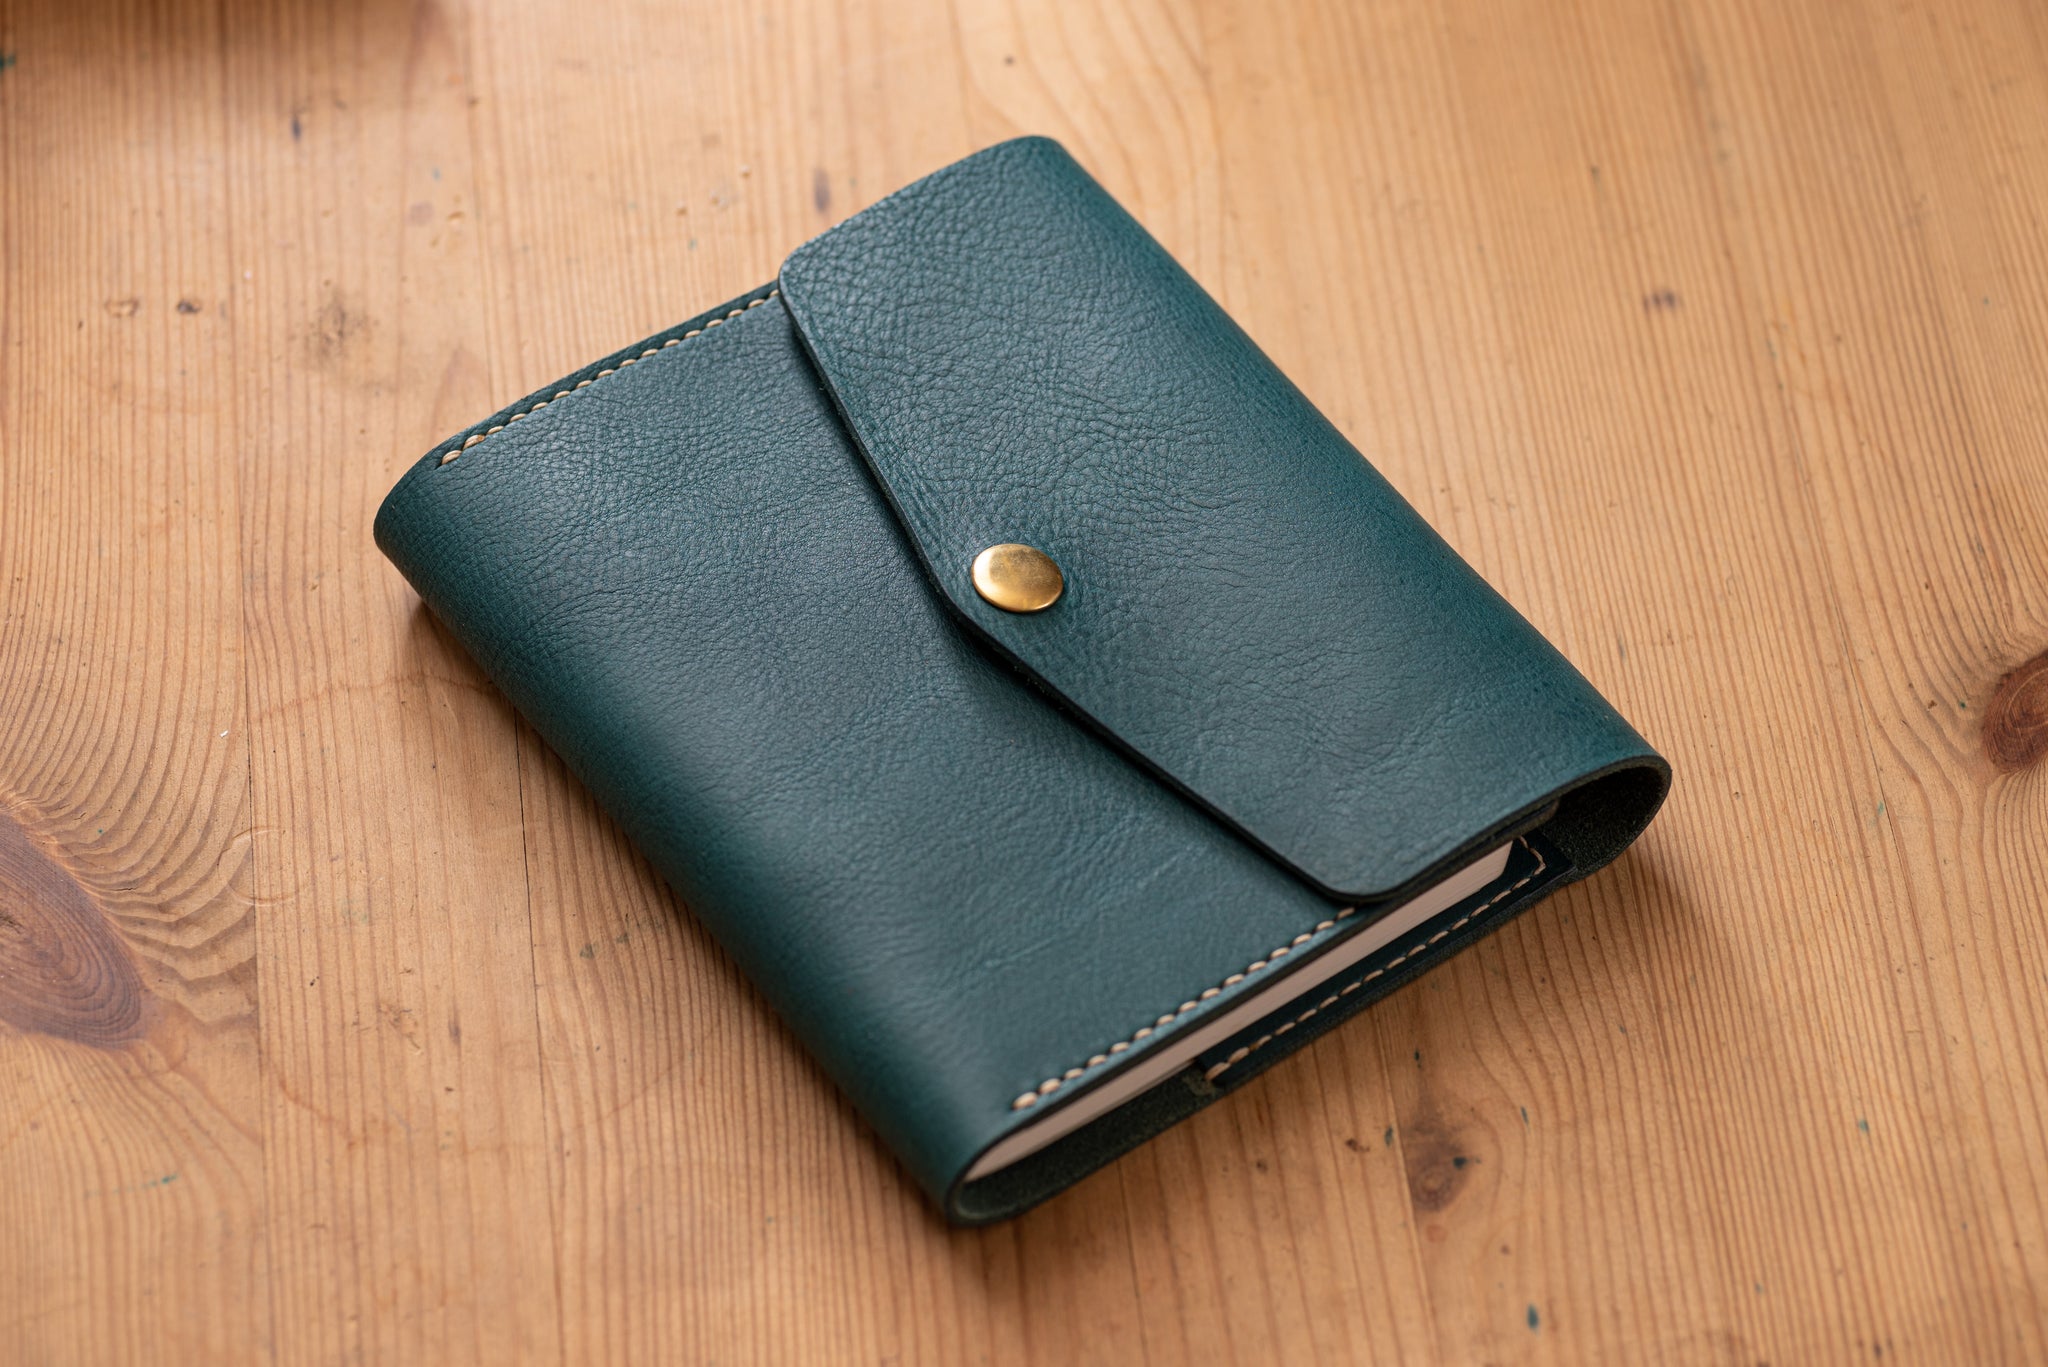 6 COLORS - A6/Hobonichi/Midori MD Navy Blue Trifold Pebbled Leather Notebook Cover - Eternal Leather Goods